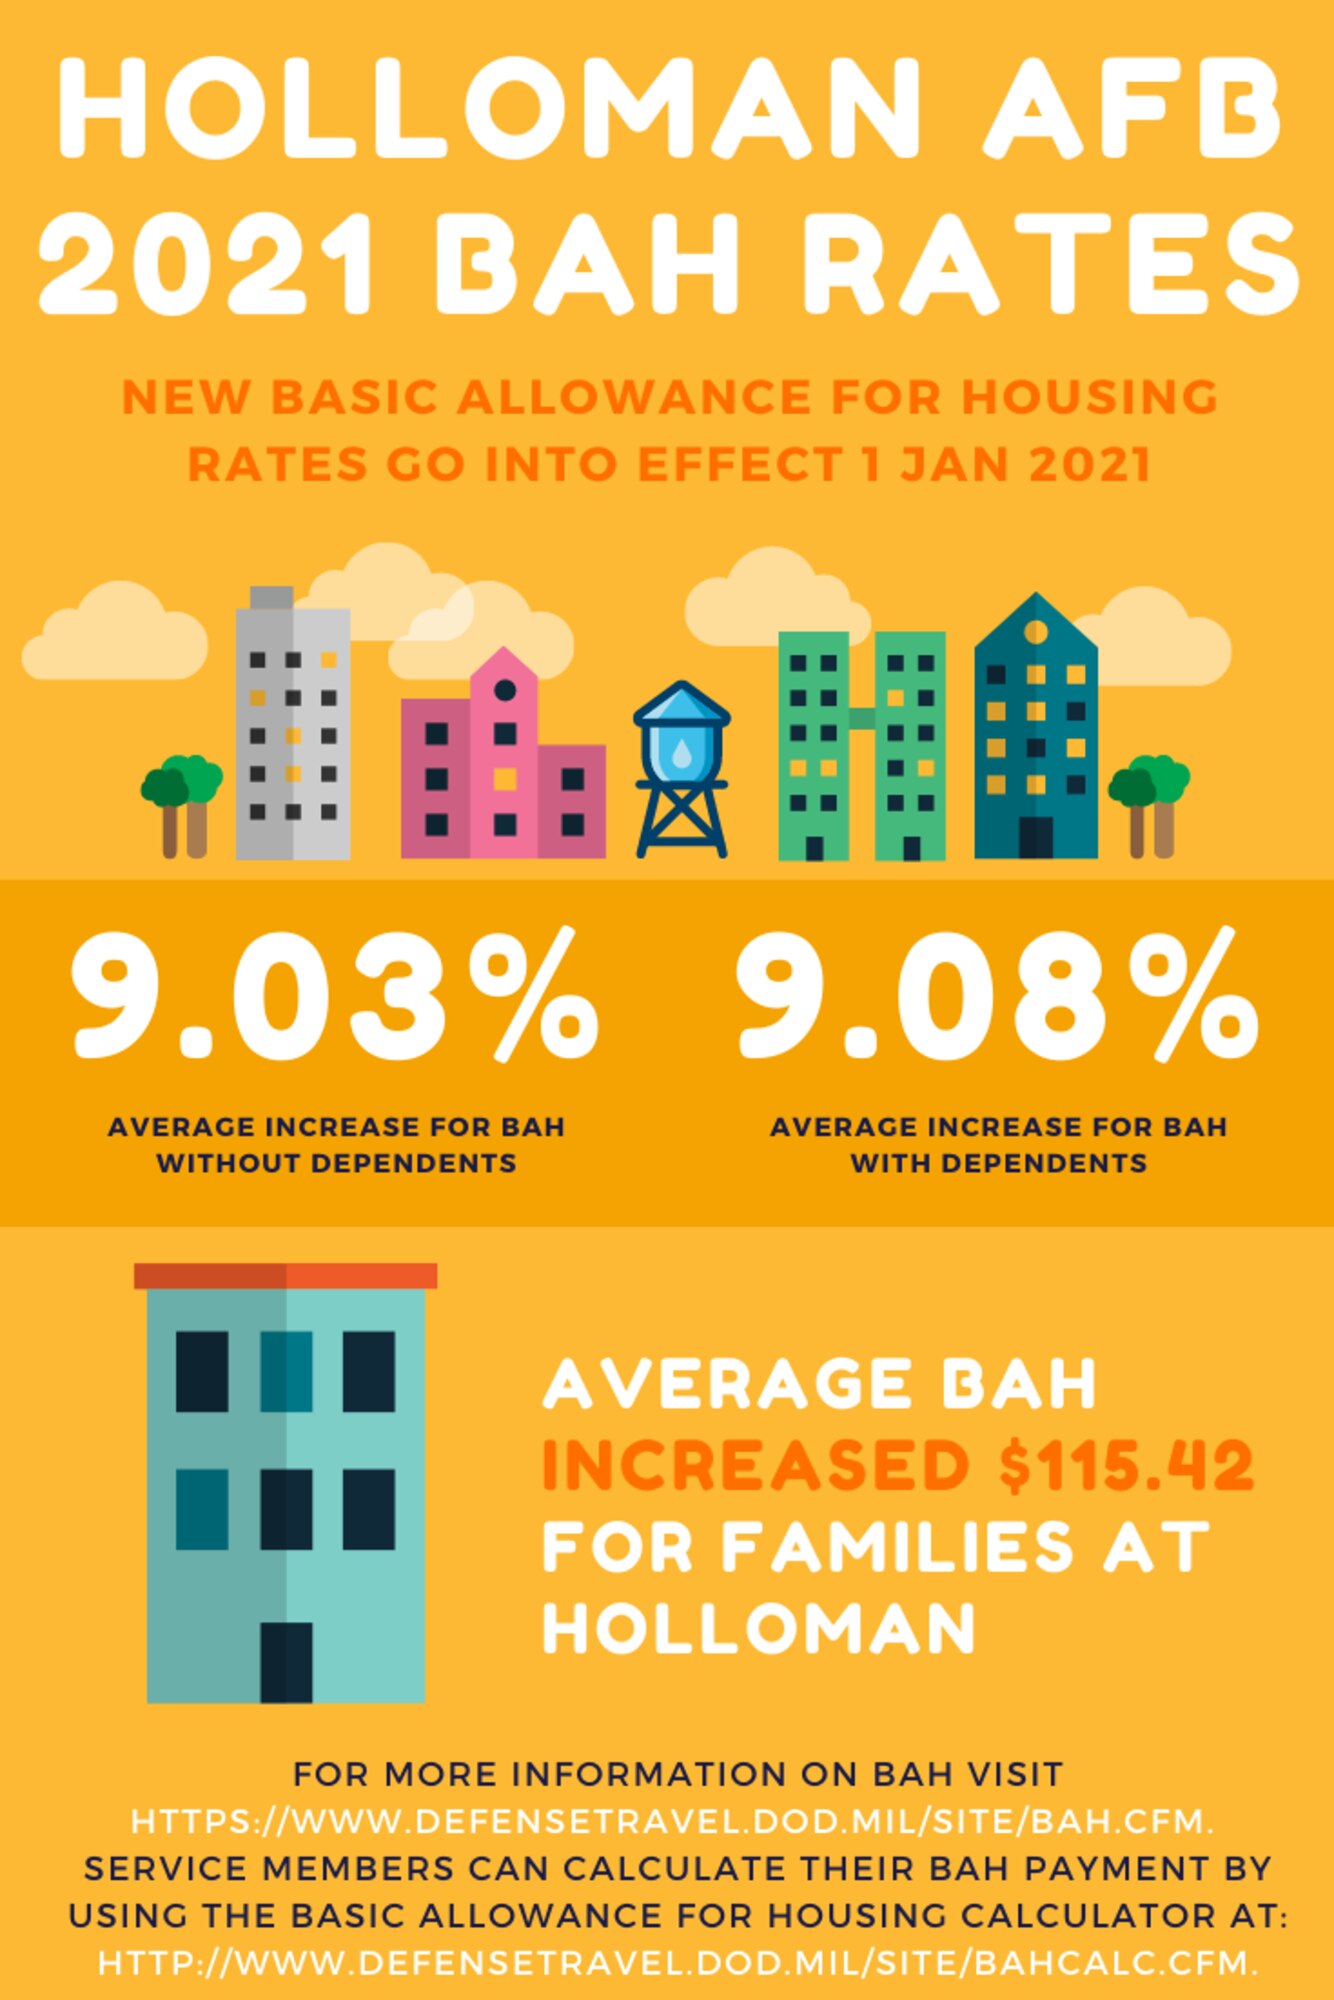 DOD Releases 2021 Basic Allowance for Housing Rates > Nellis Air Force